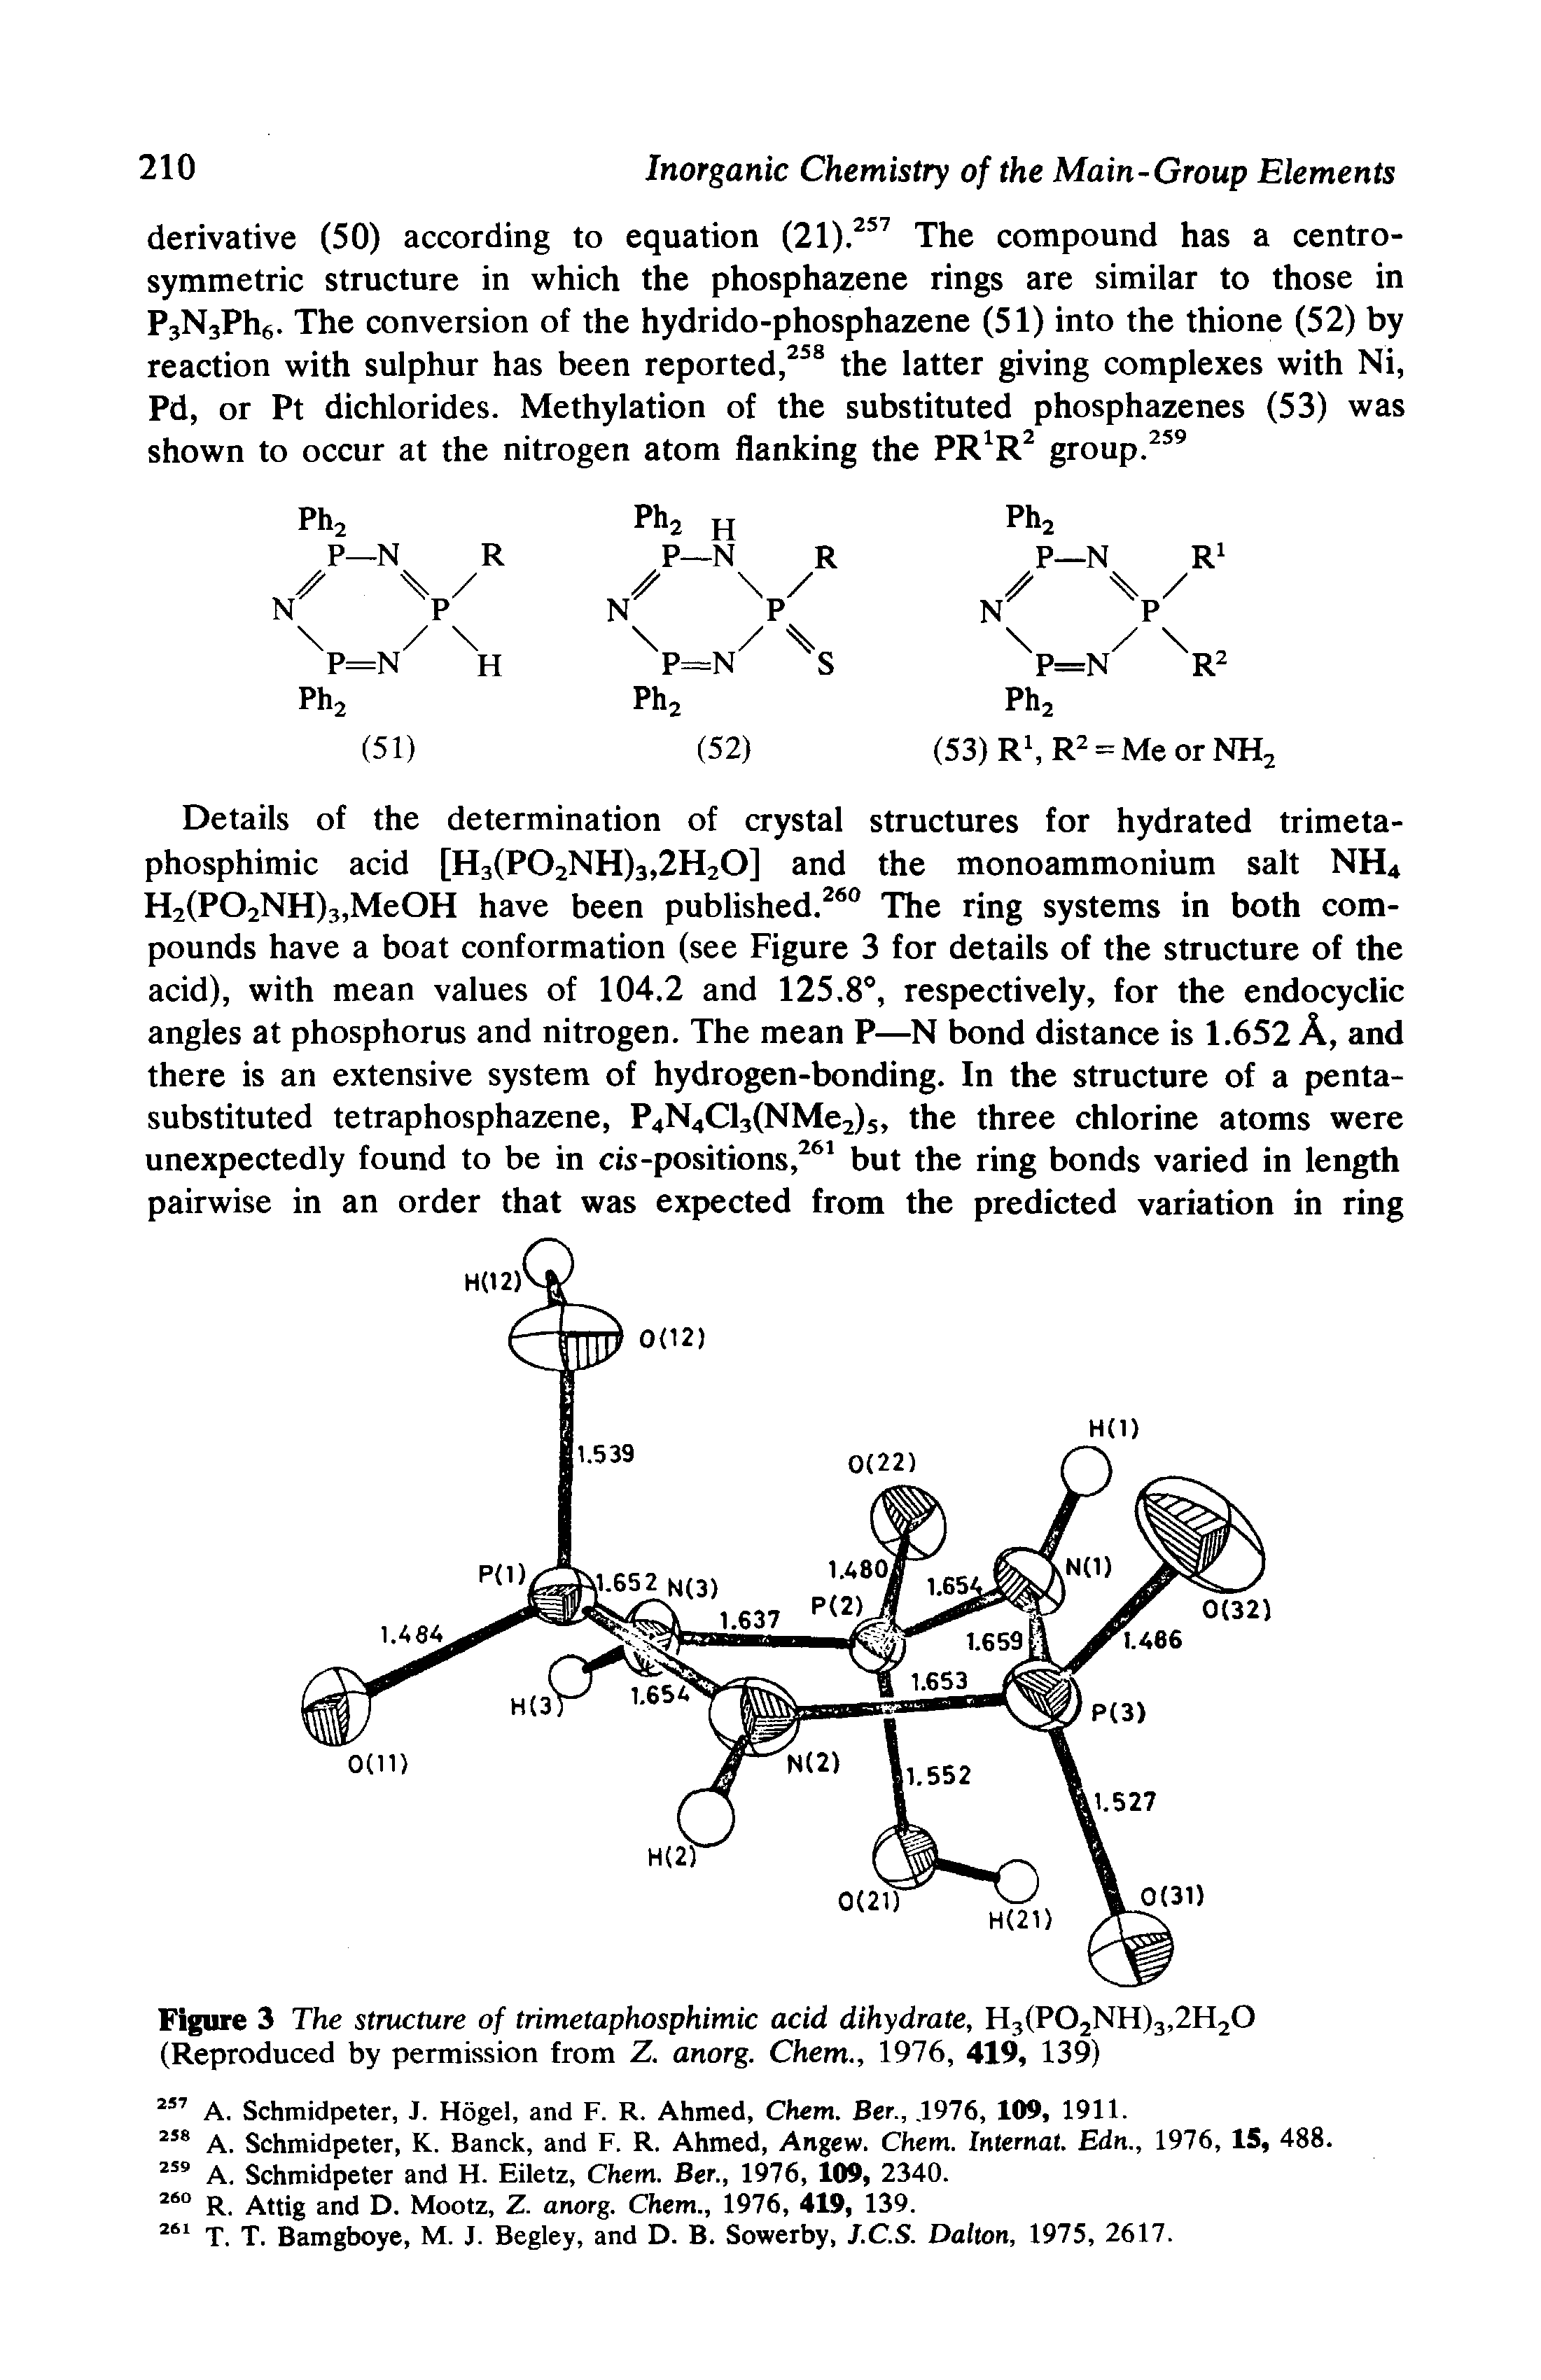 Figure 3 The structure of trimetaphosphimic acid dihydrate, H3(P02NH)3,2H20 (Reproduced by permission from Z. anorg. Chem., 1976, 419, 139)...